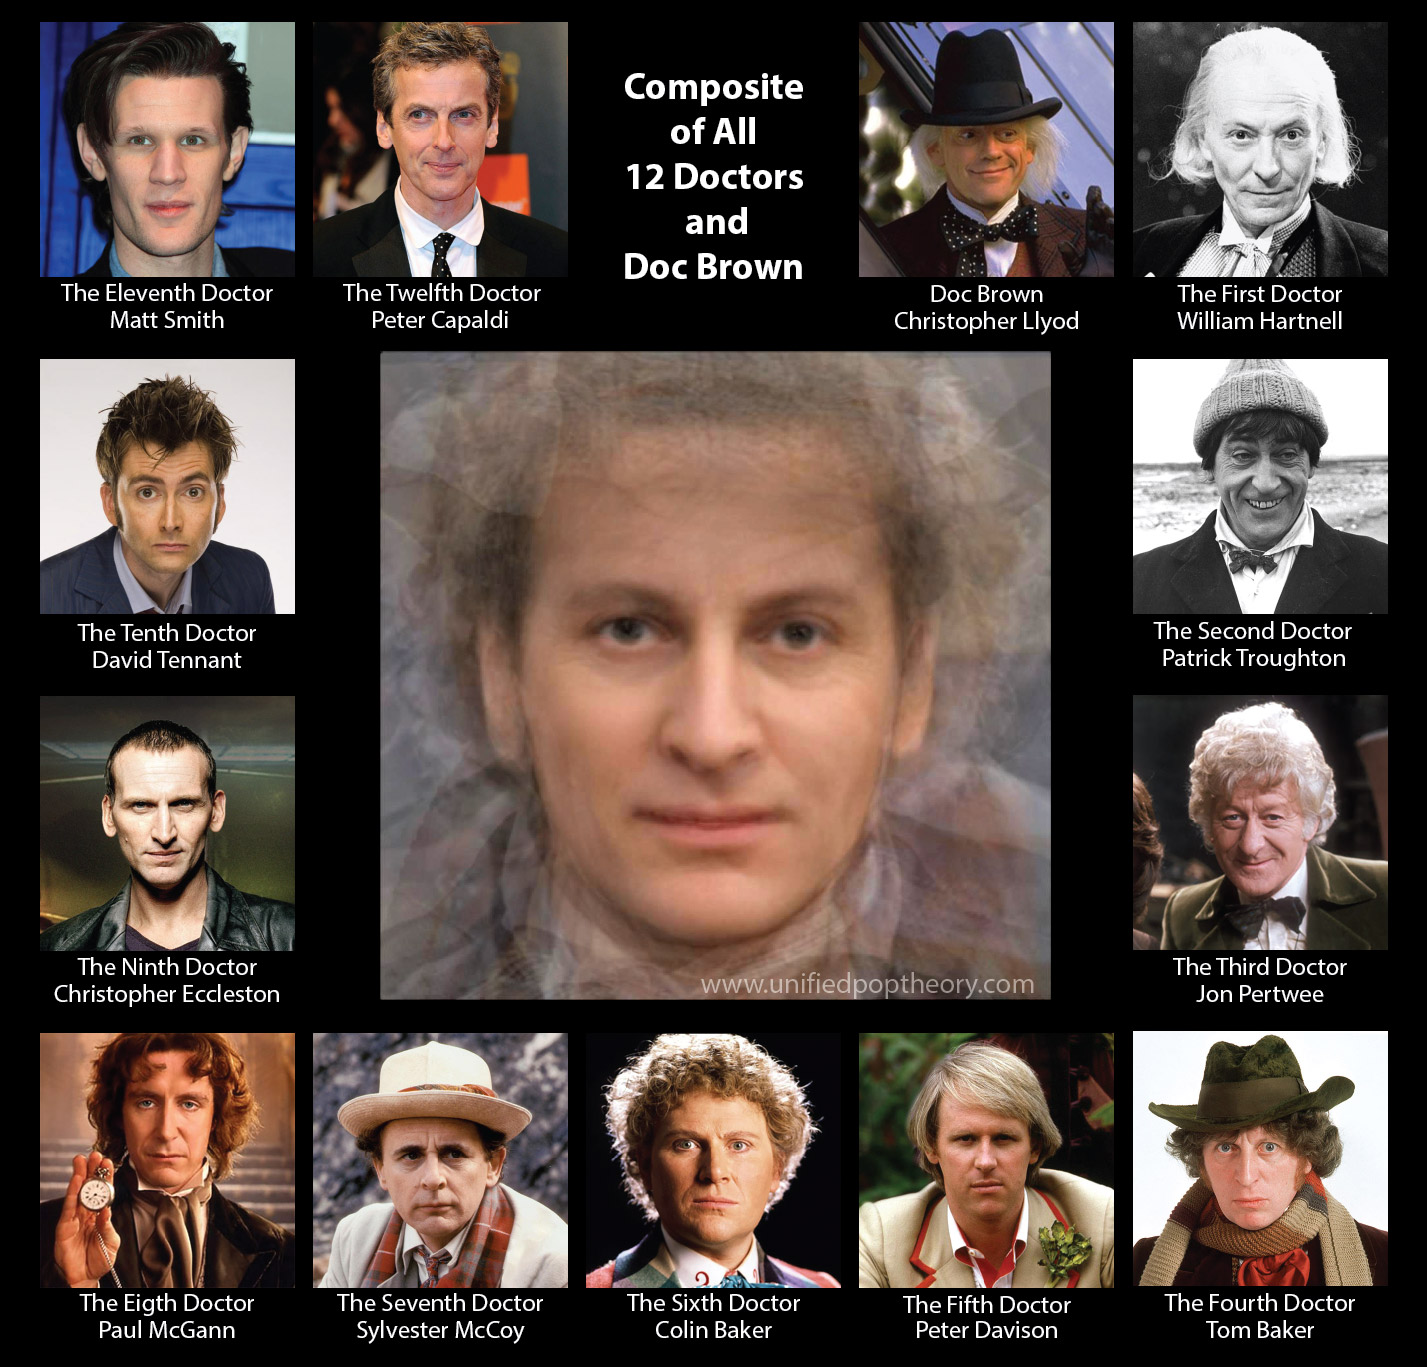 Going Full Tardis: A Composite of the Faces of All the Doctor Who Actors